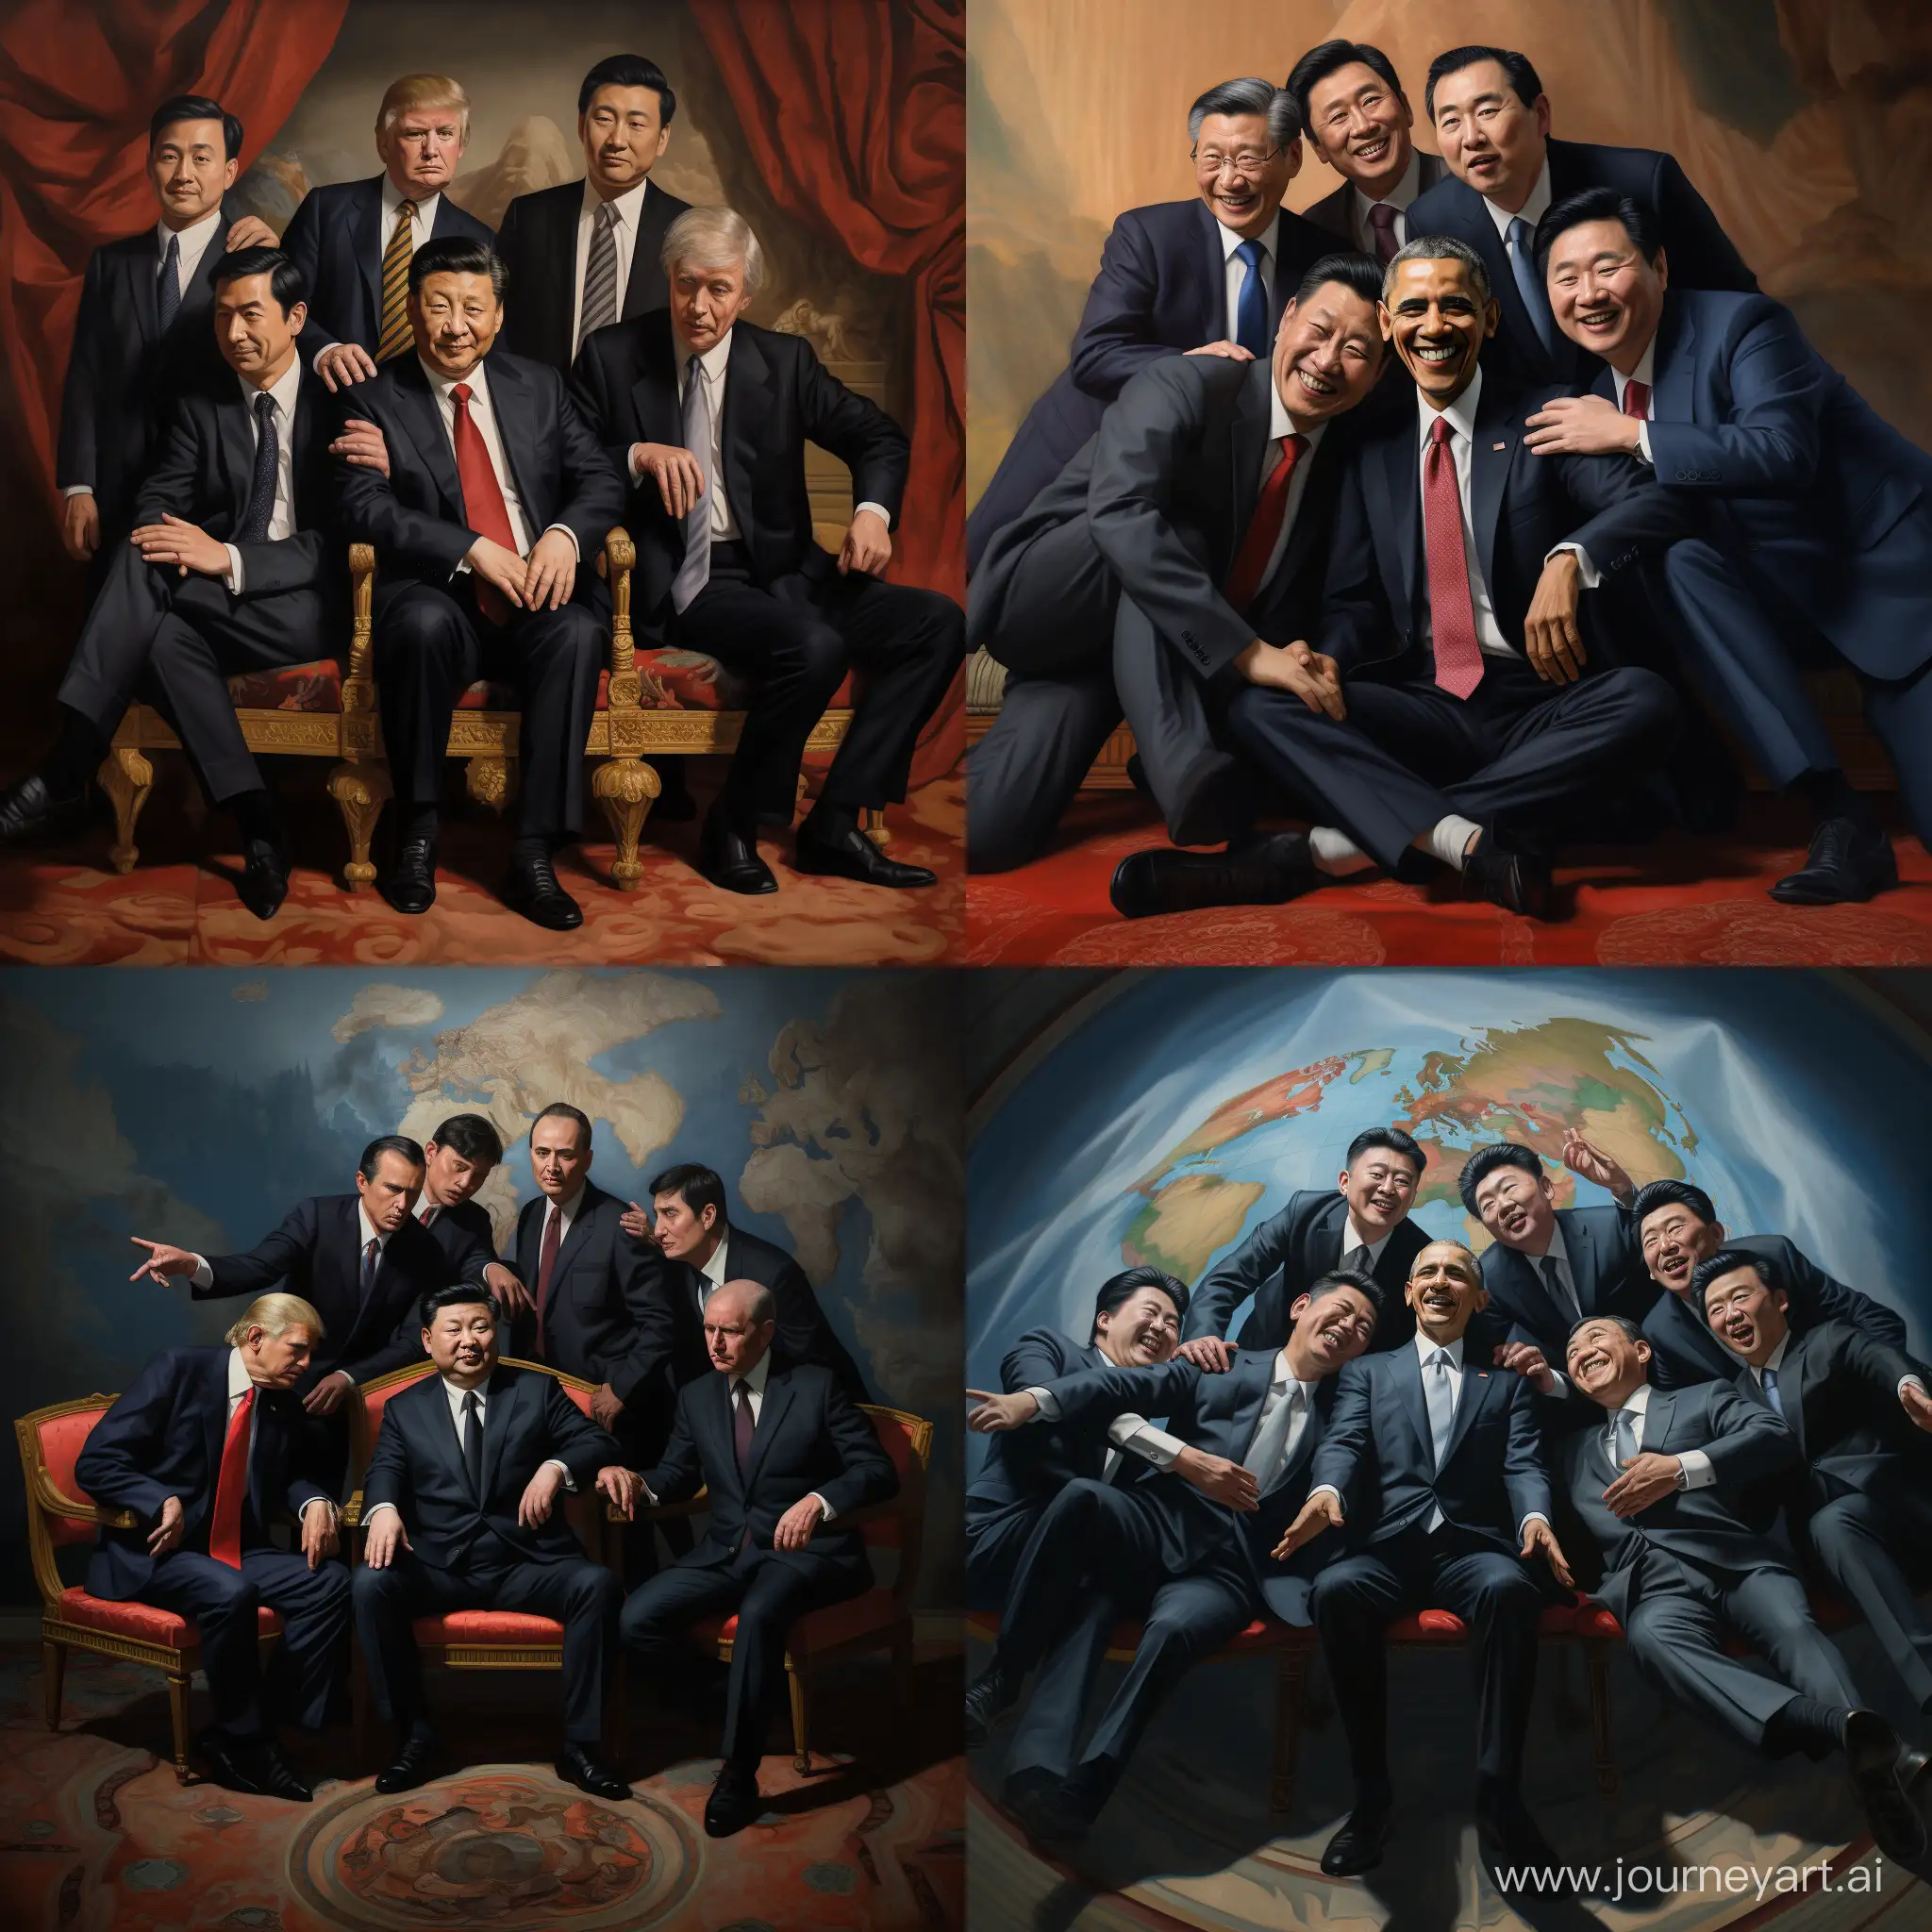 Hyper-realistic portrait of six world leaders at an international summit, displayed in a respectful and dignified manner. Each leader is depicted in formal attire, showcasing a moment of global cooperation and unity. The setting is a grand, well-lit conference i6 world leaders being wasted after drug party.Emphasize the details like facial expressions, clothing textures, and the ambient lighting of the conference room to enhance the realism.